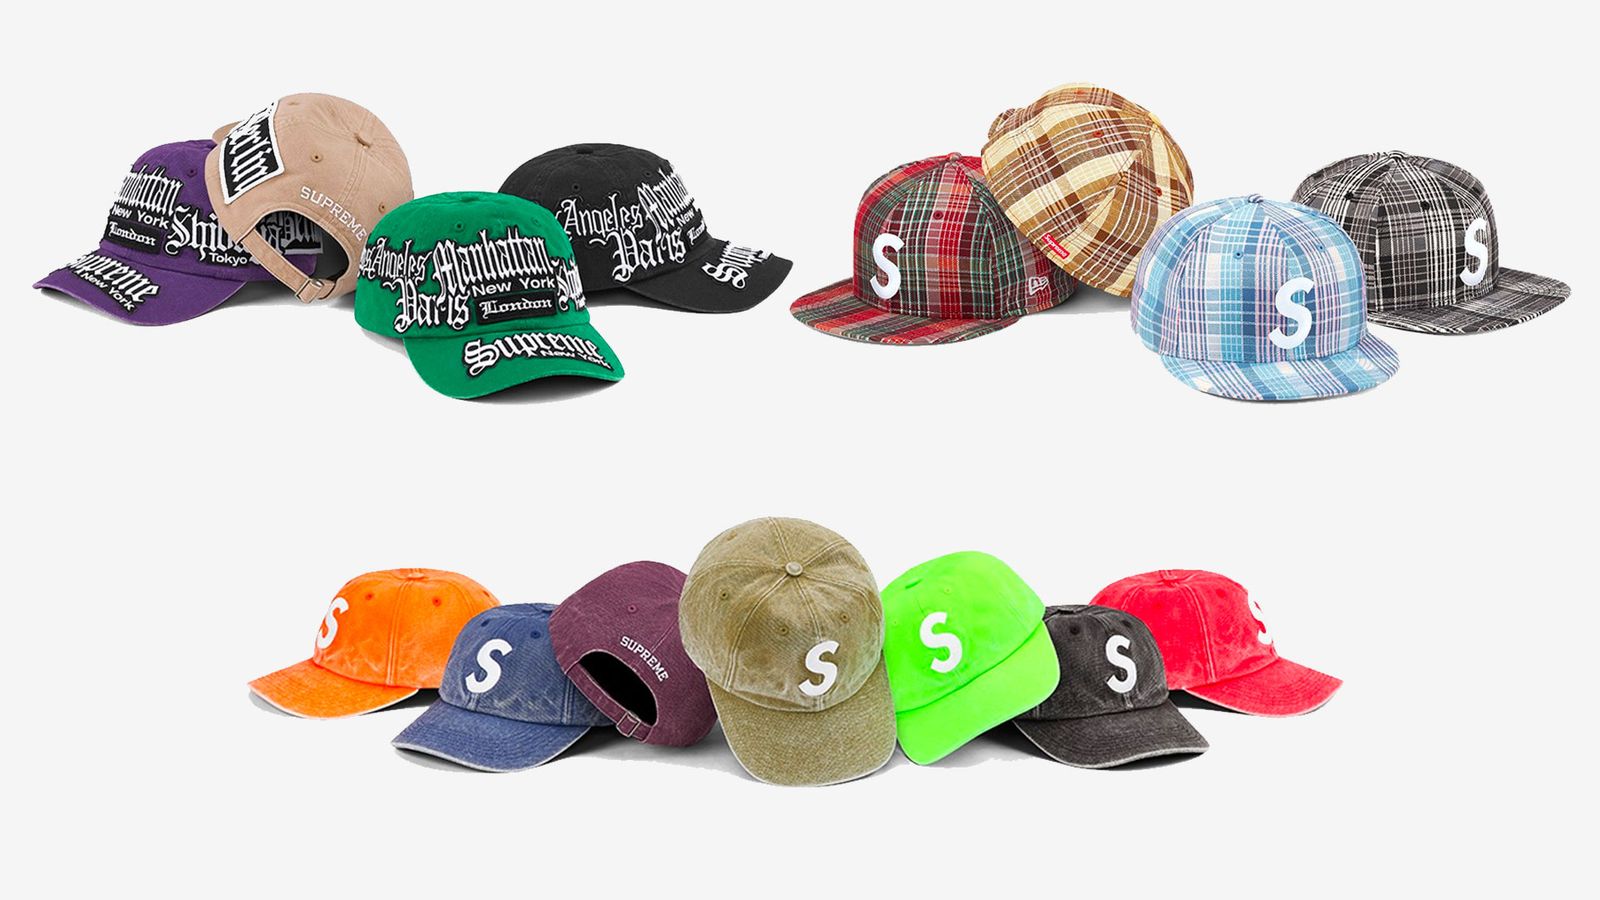 Supreme Spring/Summer 2023 collection - A selection of hats in green, orange, red, purple, and more.